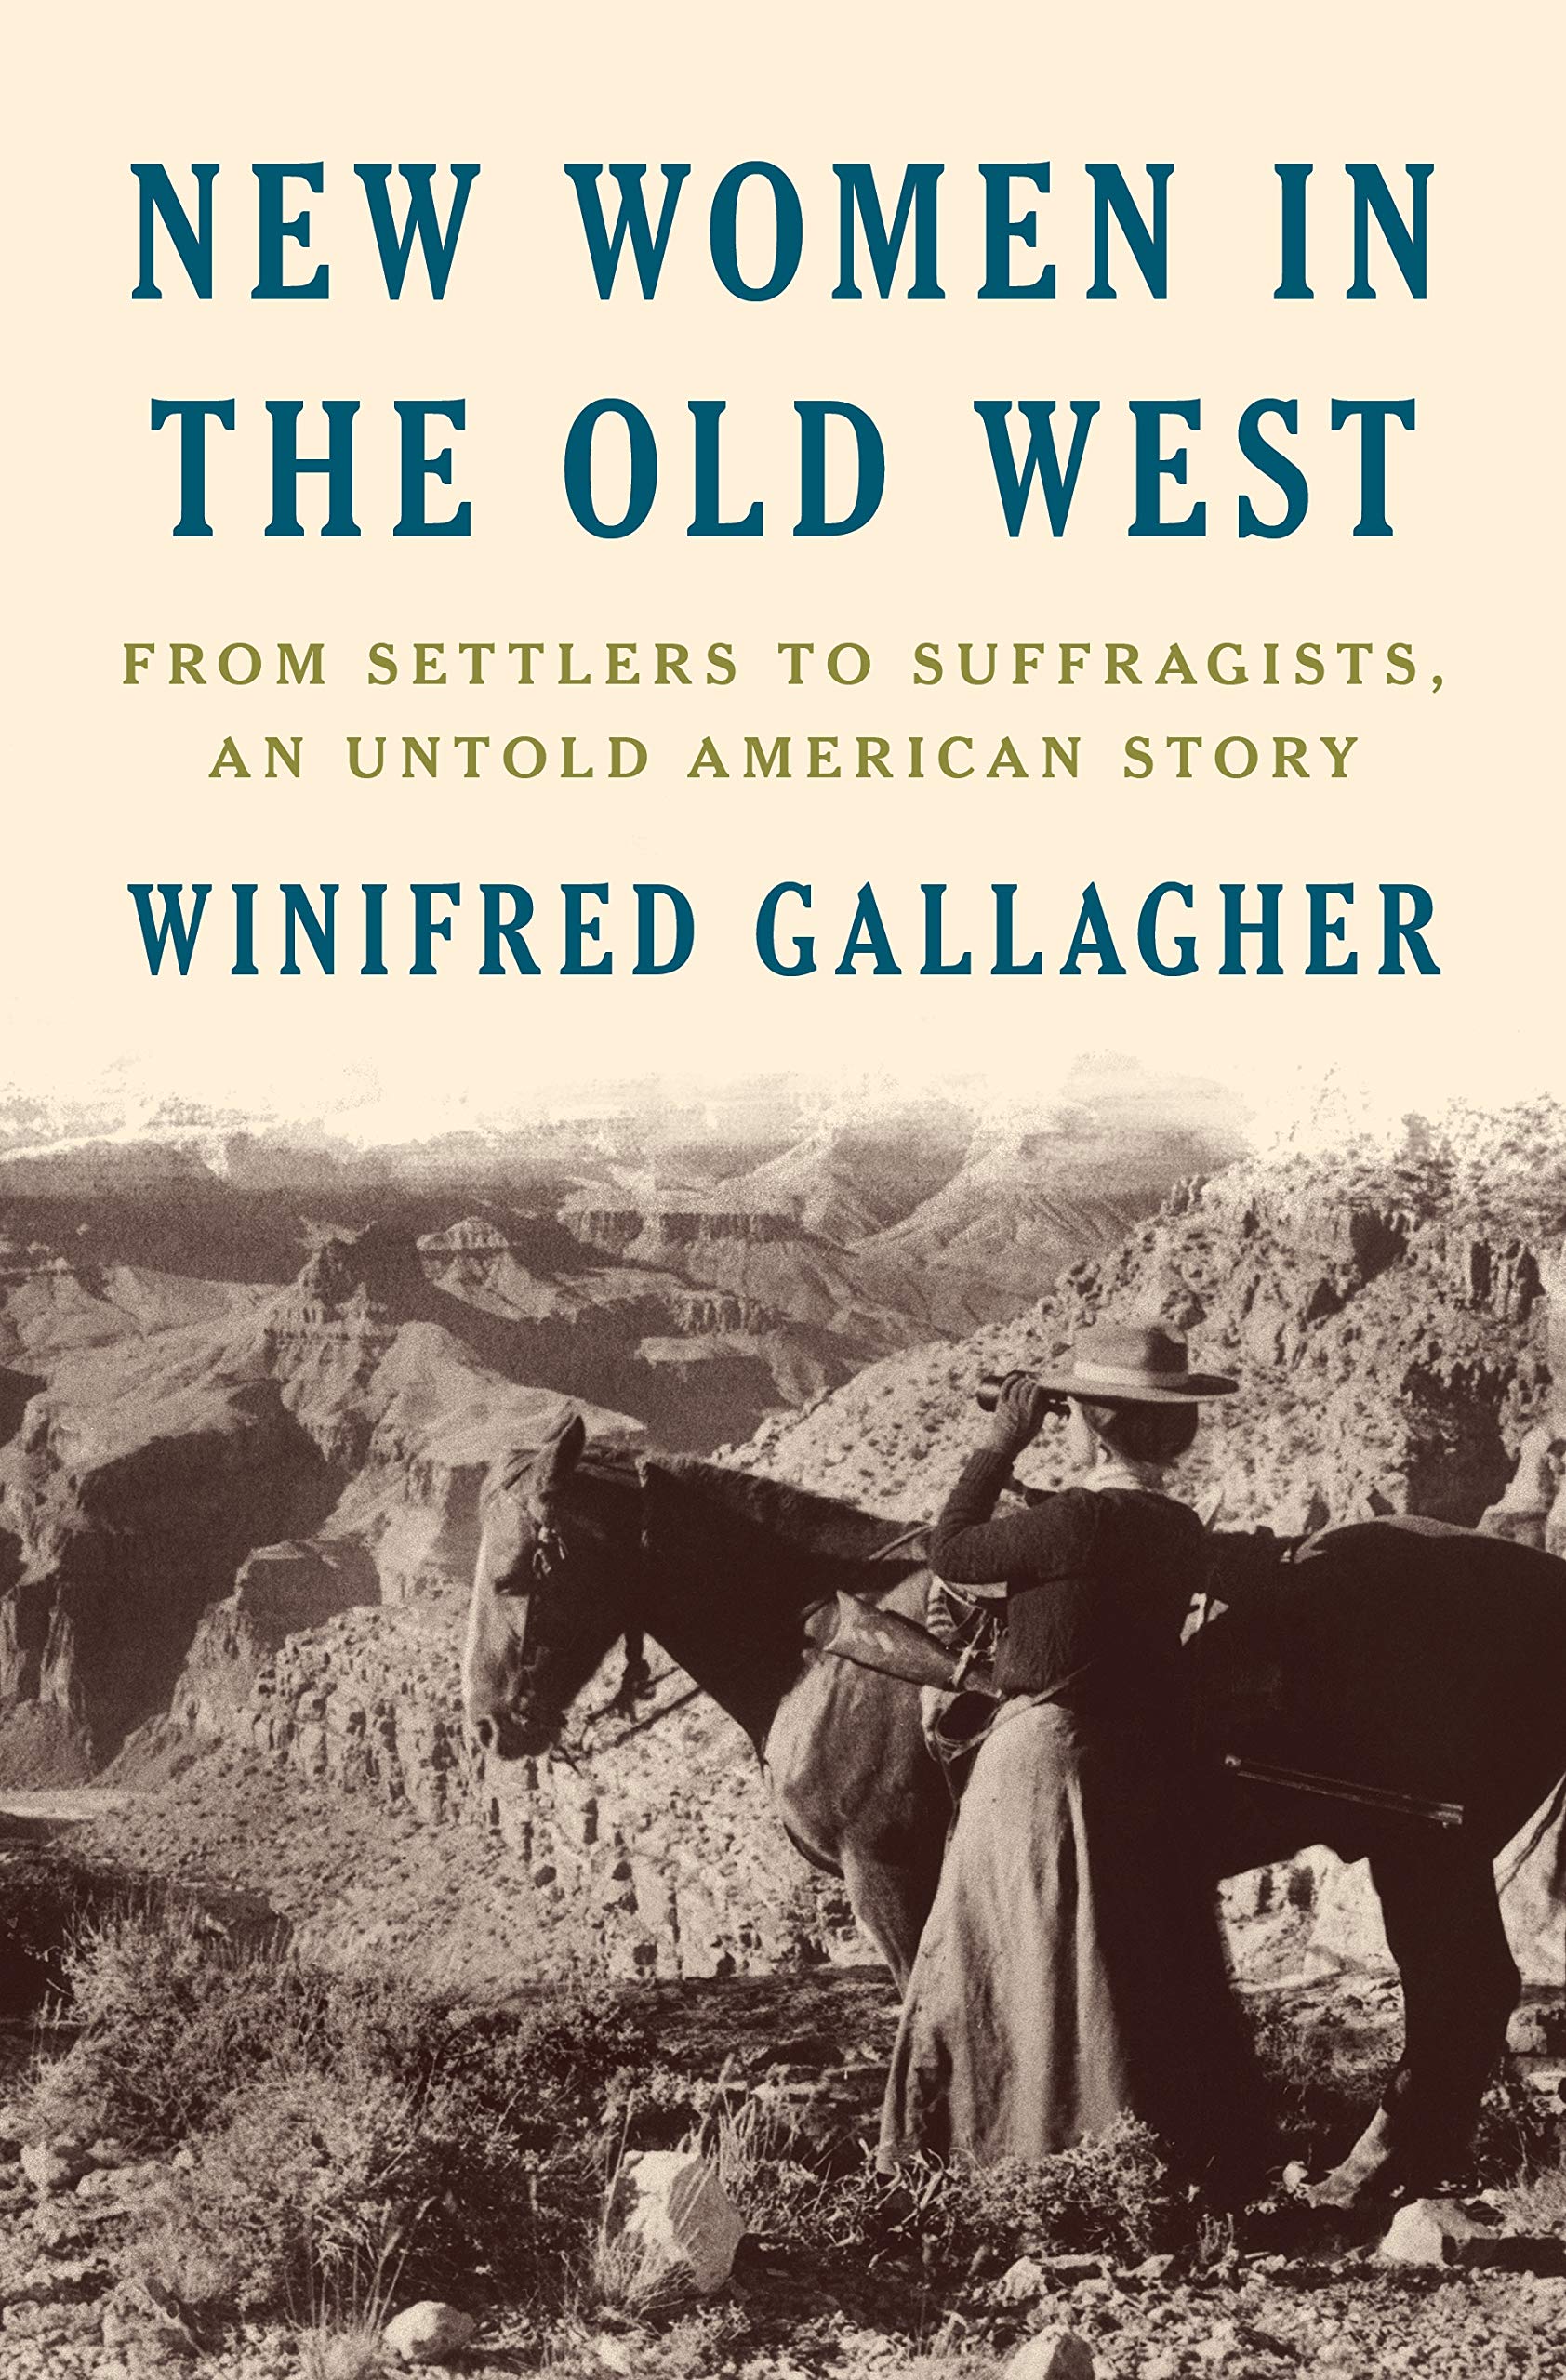 Winifred Gallagher, New Women in the Old West: From Settlers to Suffragists, an Untold American Story